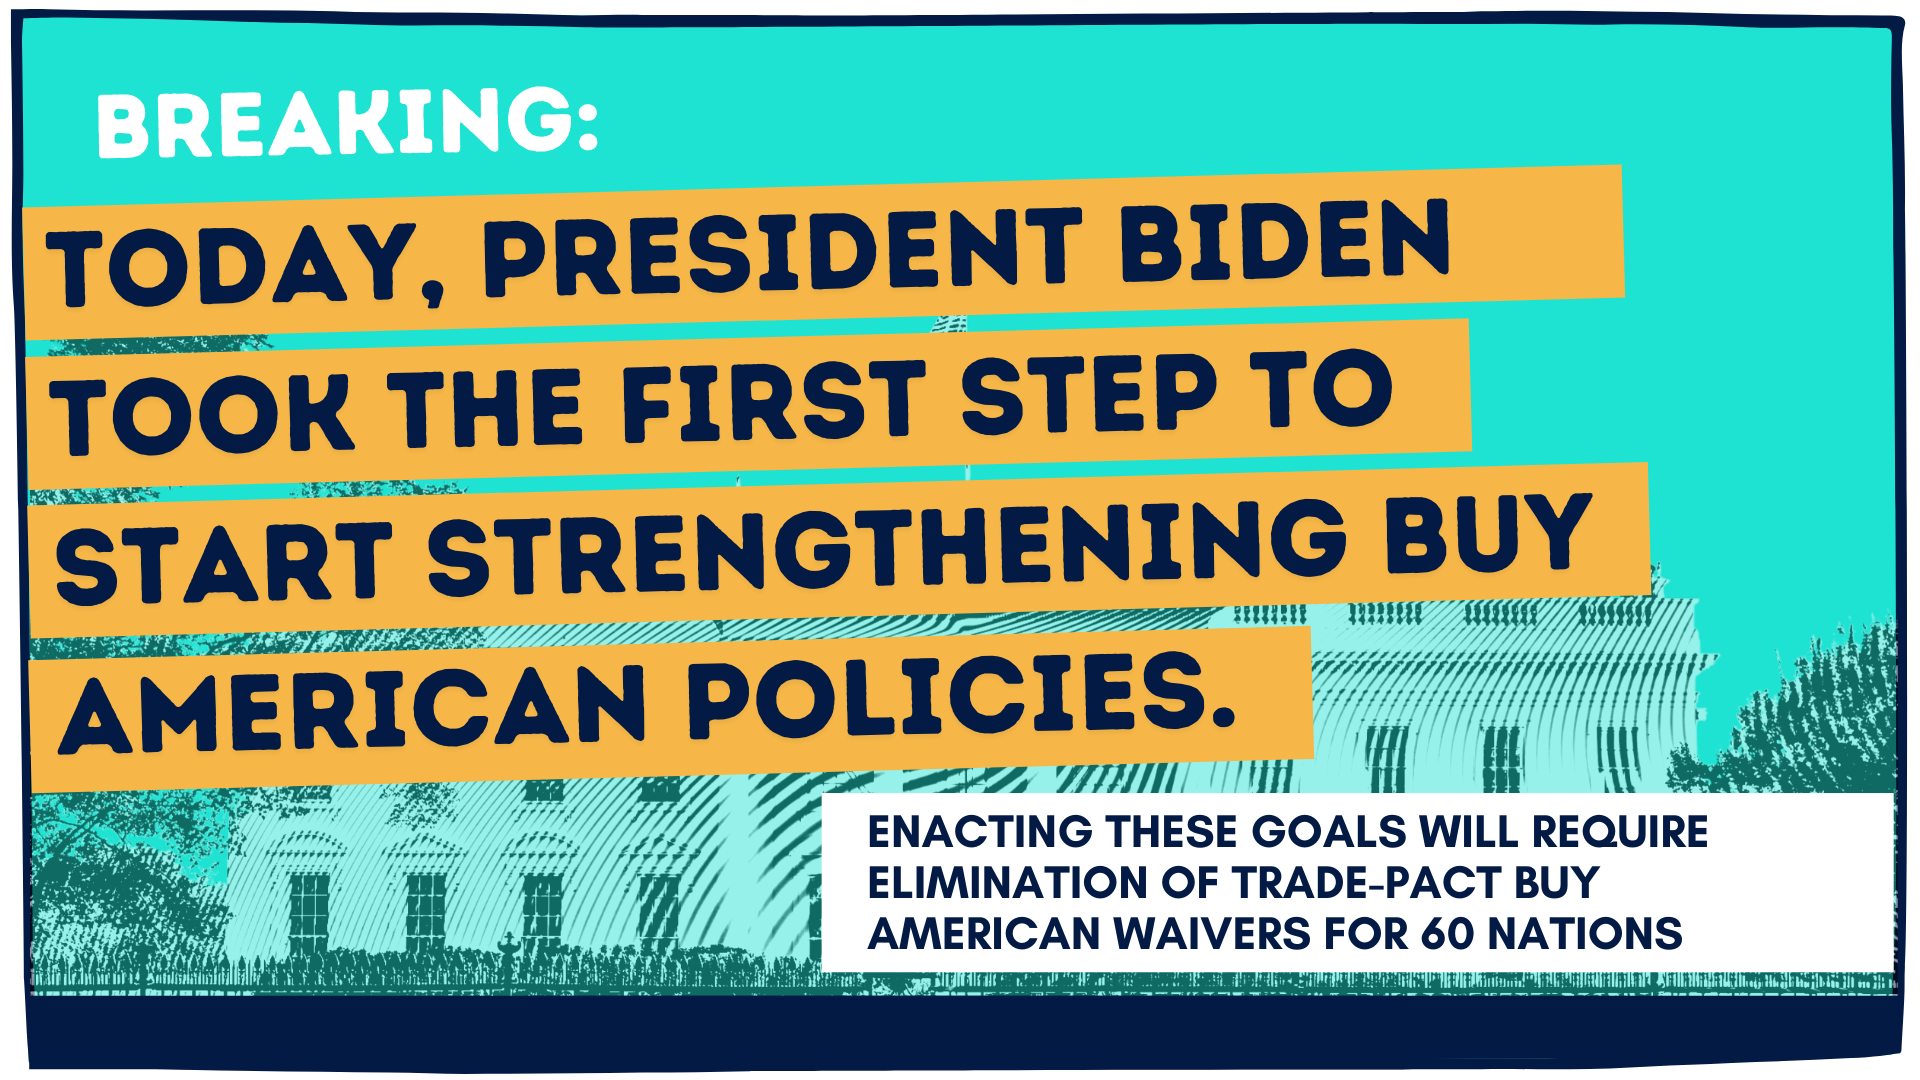 Today, President Biden took the first step to start strengthening Buy American policies.